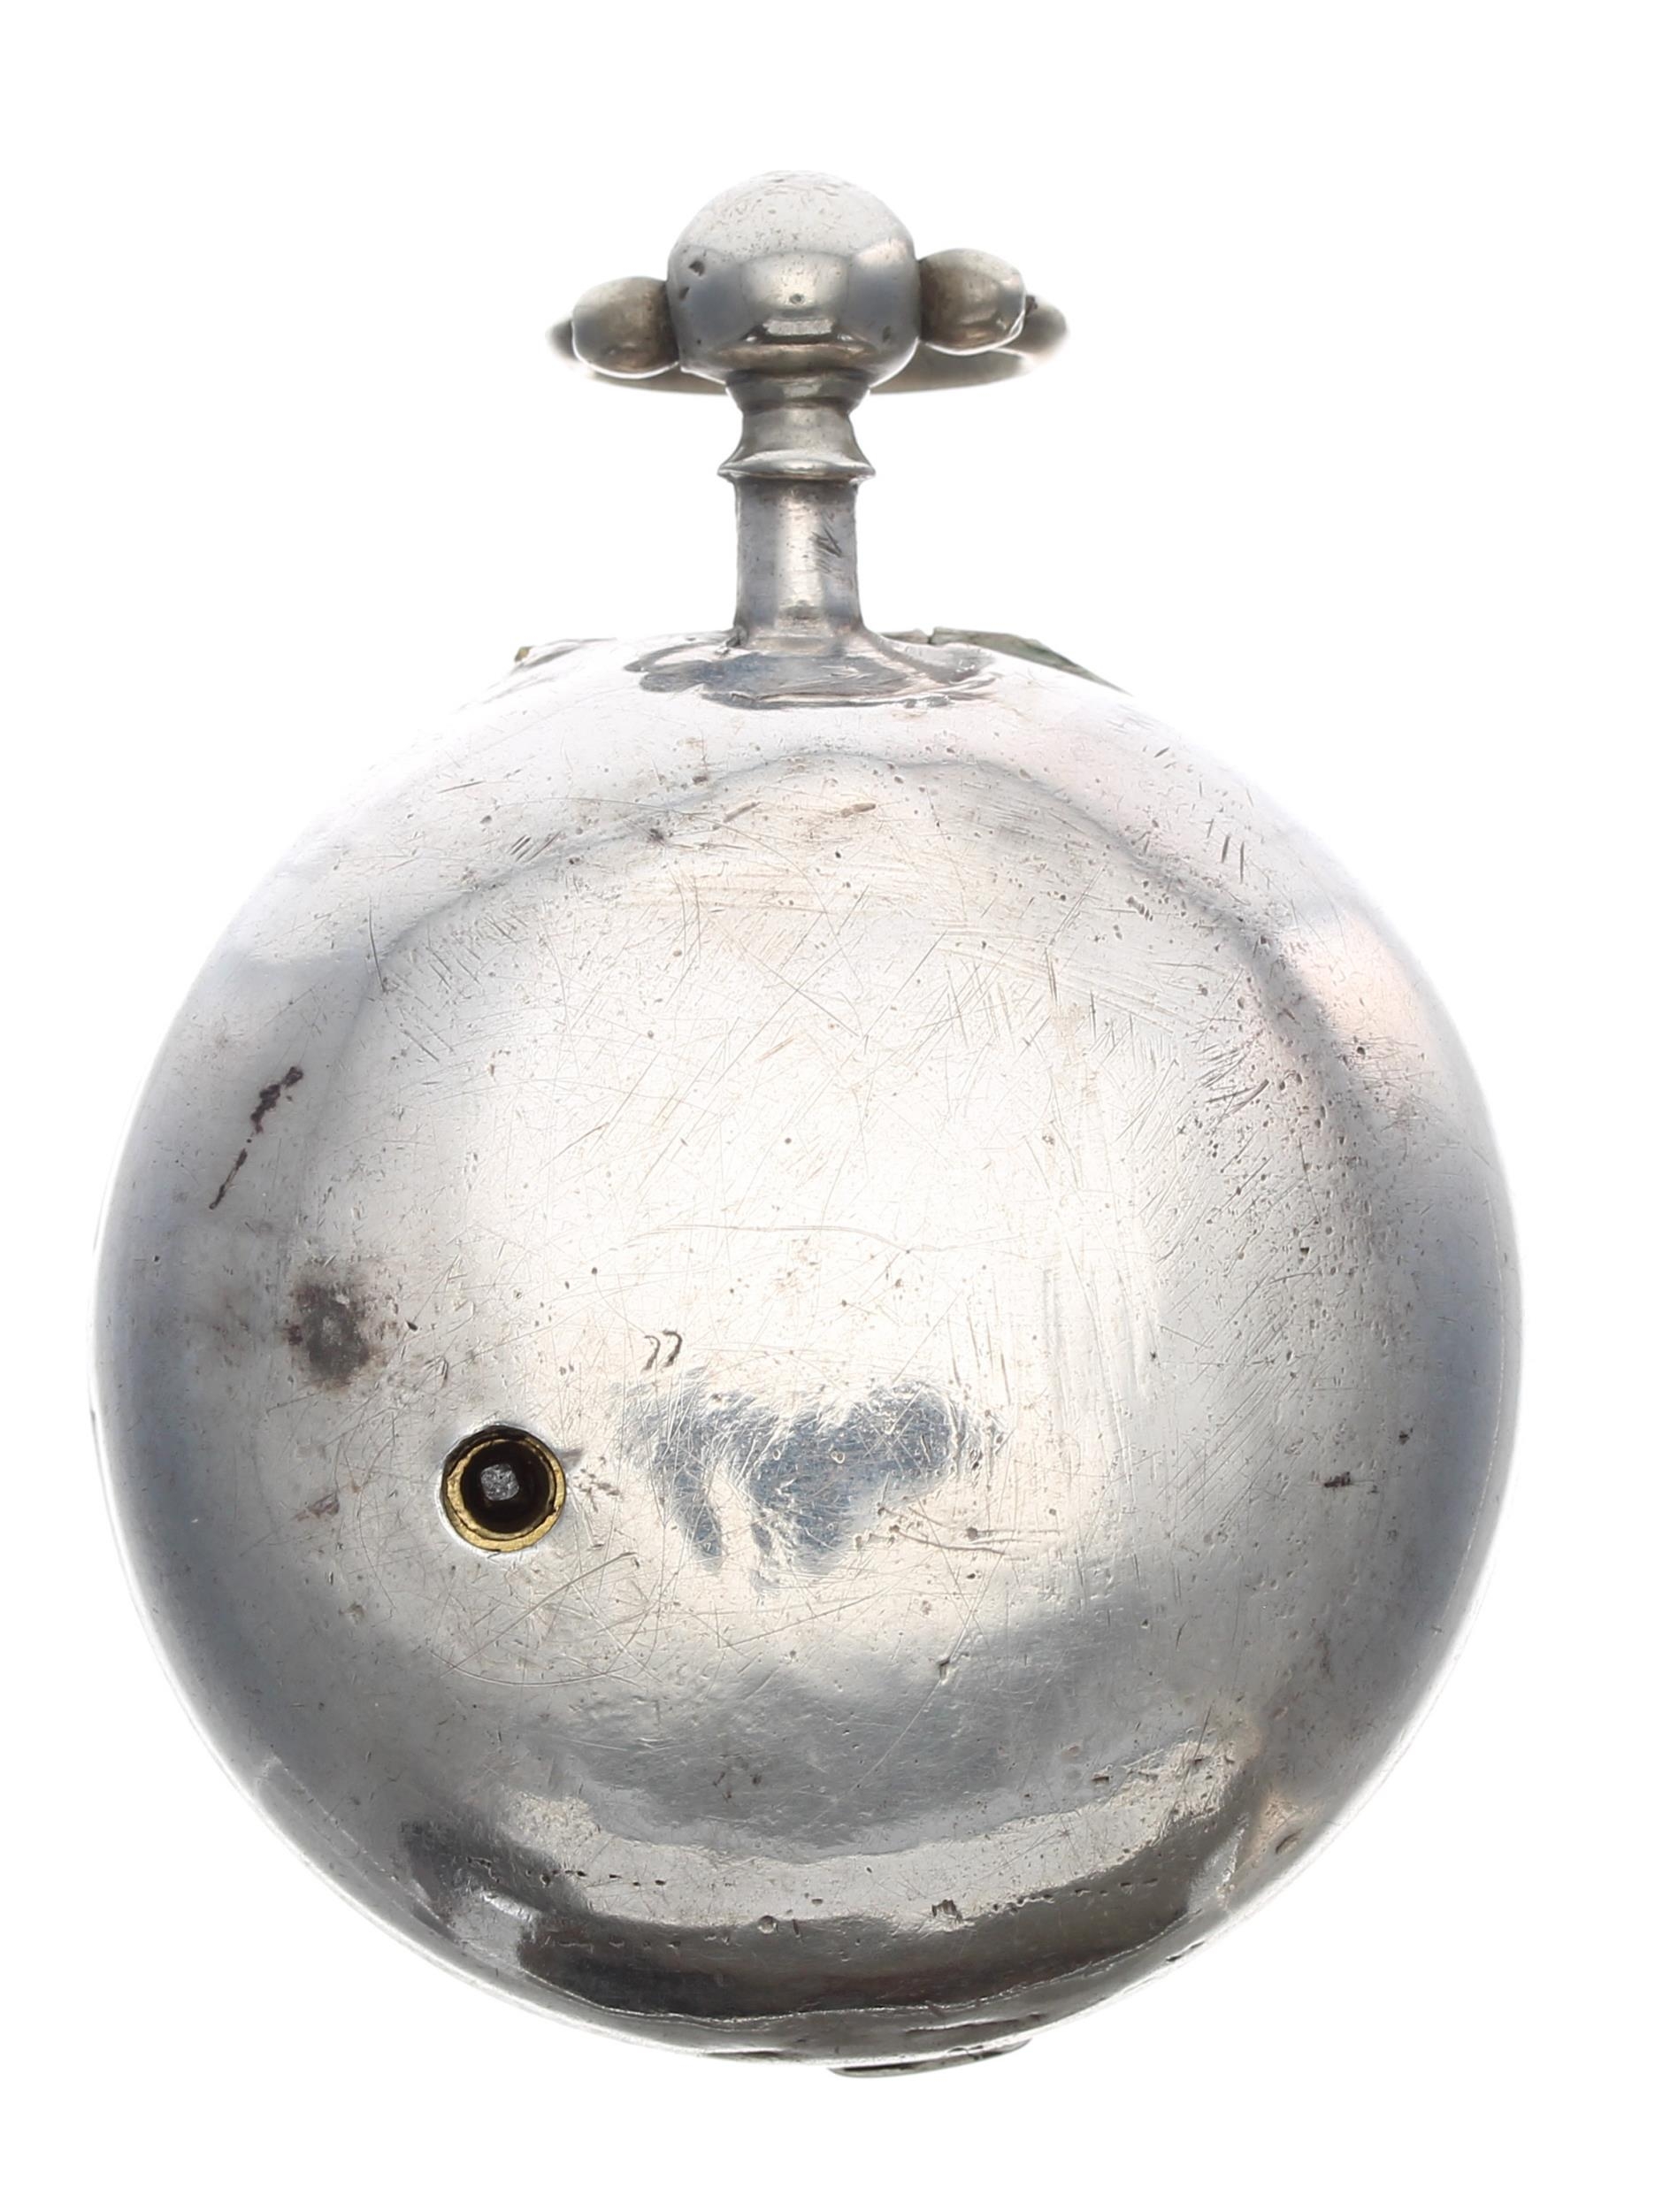 George III silver verge pair cased pocket watch, London 1800, the fusee movement signed Wm Hope, no. - Image 4 of 5